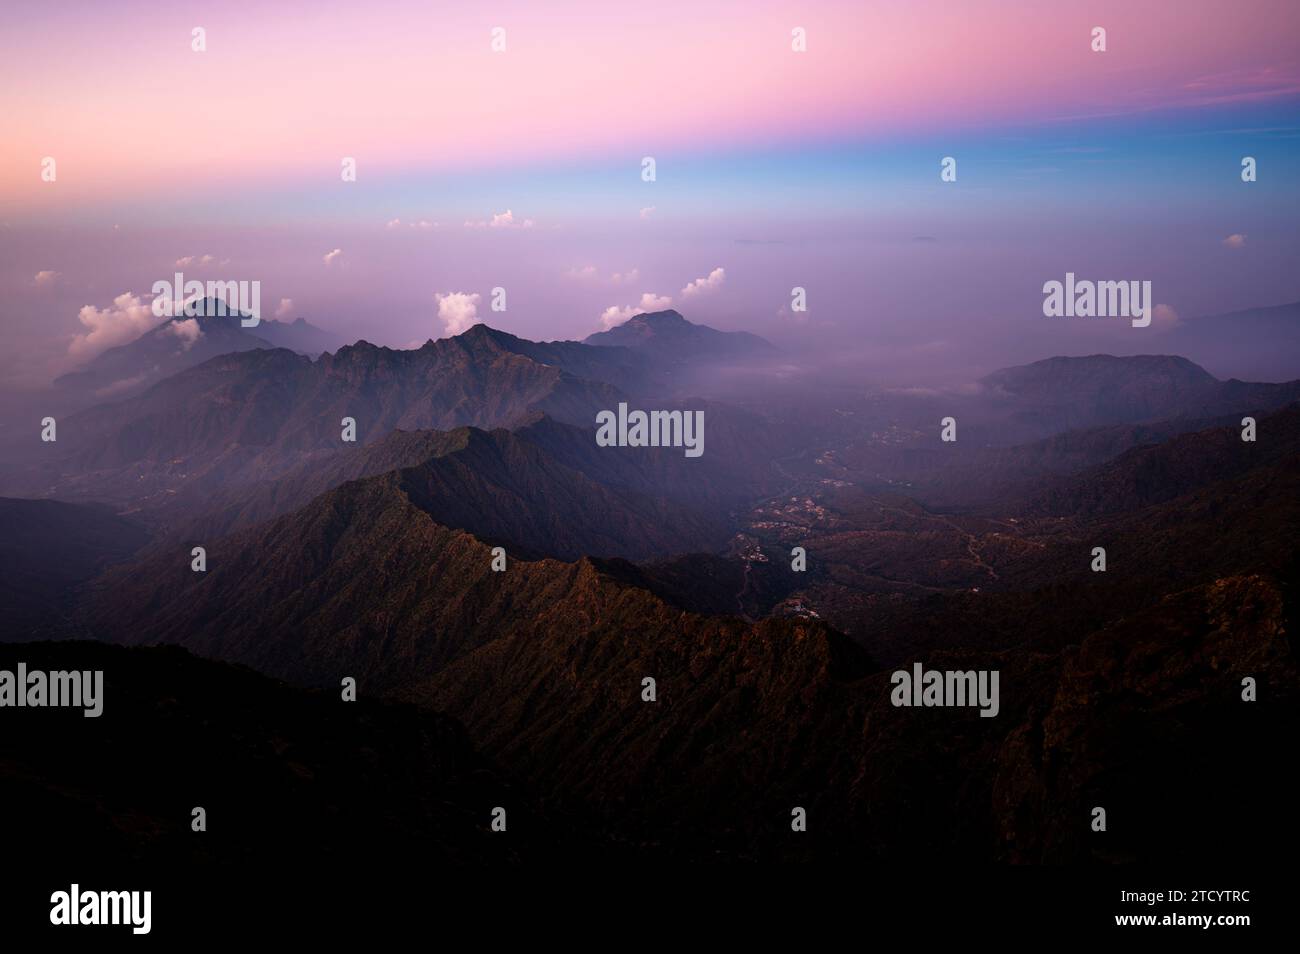 Dramatic and picturesque mountain landscape. Sunrise from Jabal Mareer. The Sarawat Mountains, Saudi Arabia. Stock Photo